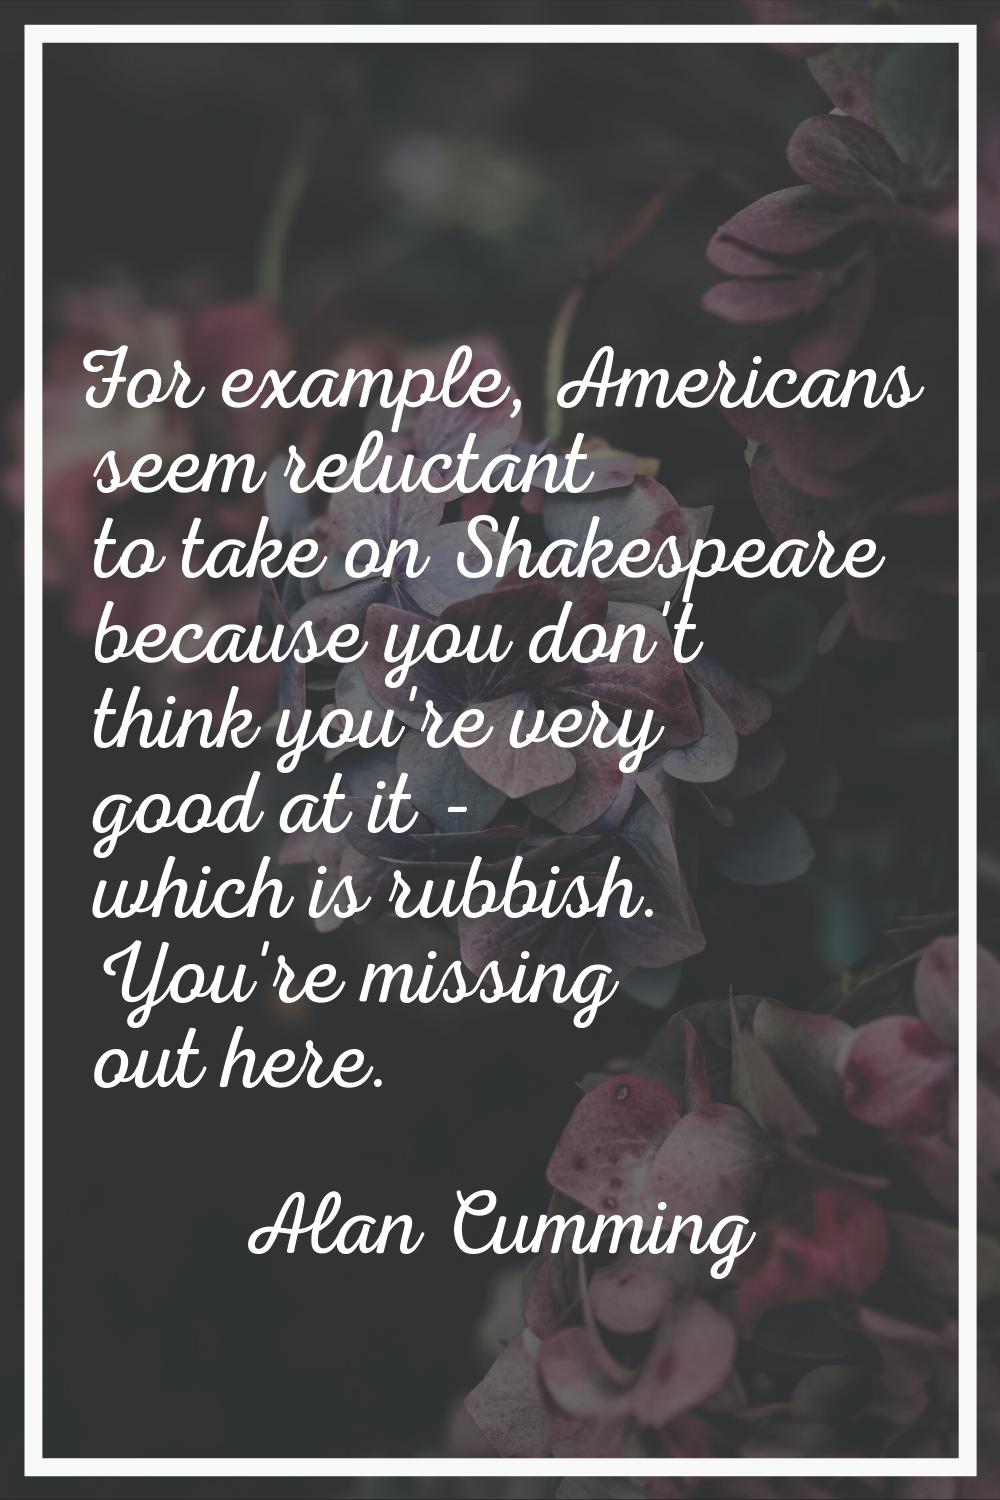 For example, Americans seem reluctant to take on Shakespeare because you don't think you're very go